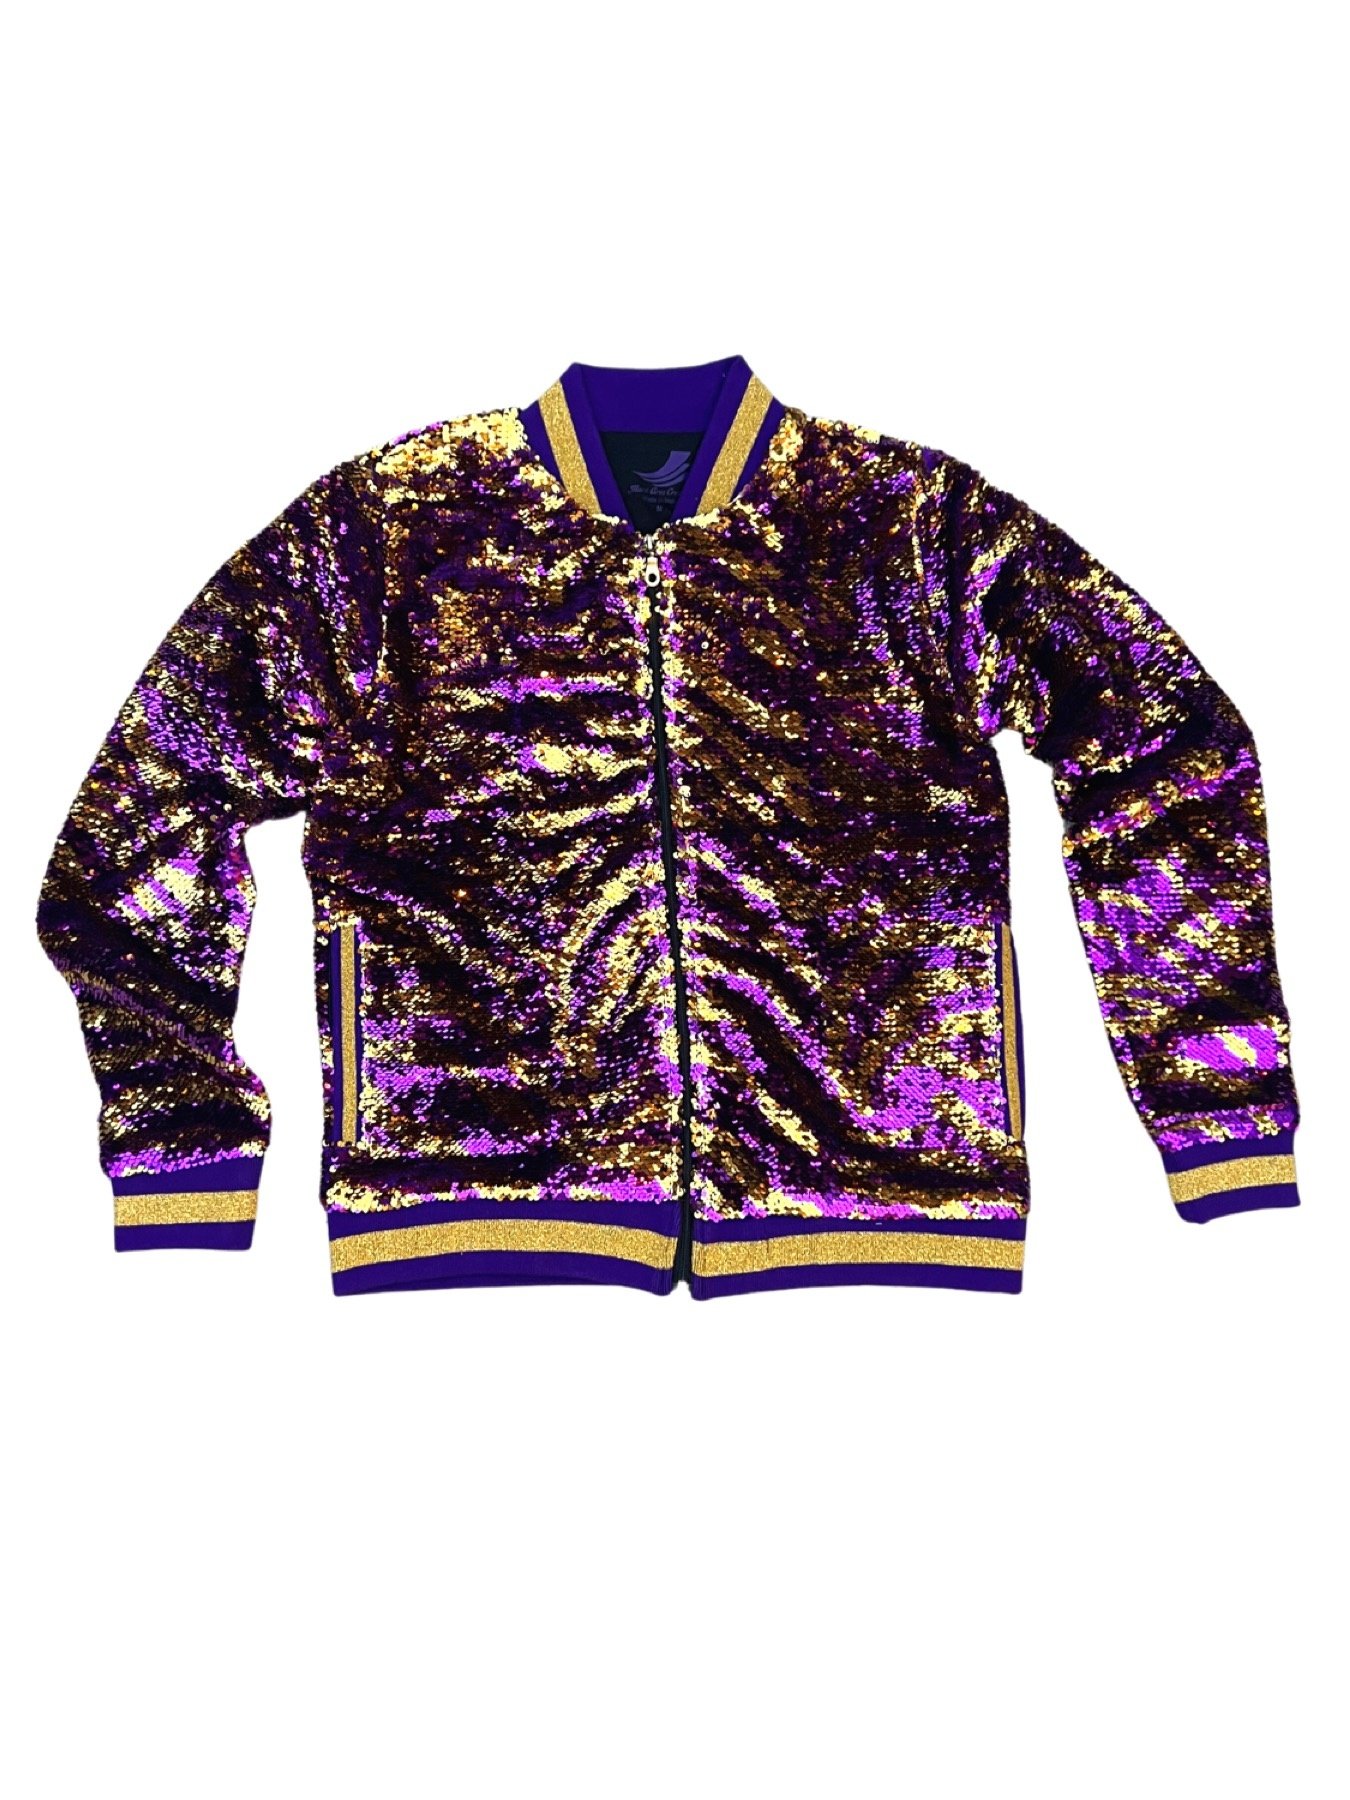 Glittery Sequin Dress Jackets For Women For Women Casual Long Sleeve Coat  With Shiny Lapel For Rave And Parties From Franceston, $27.82 | DHgate.Com